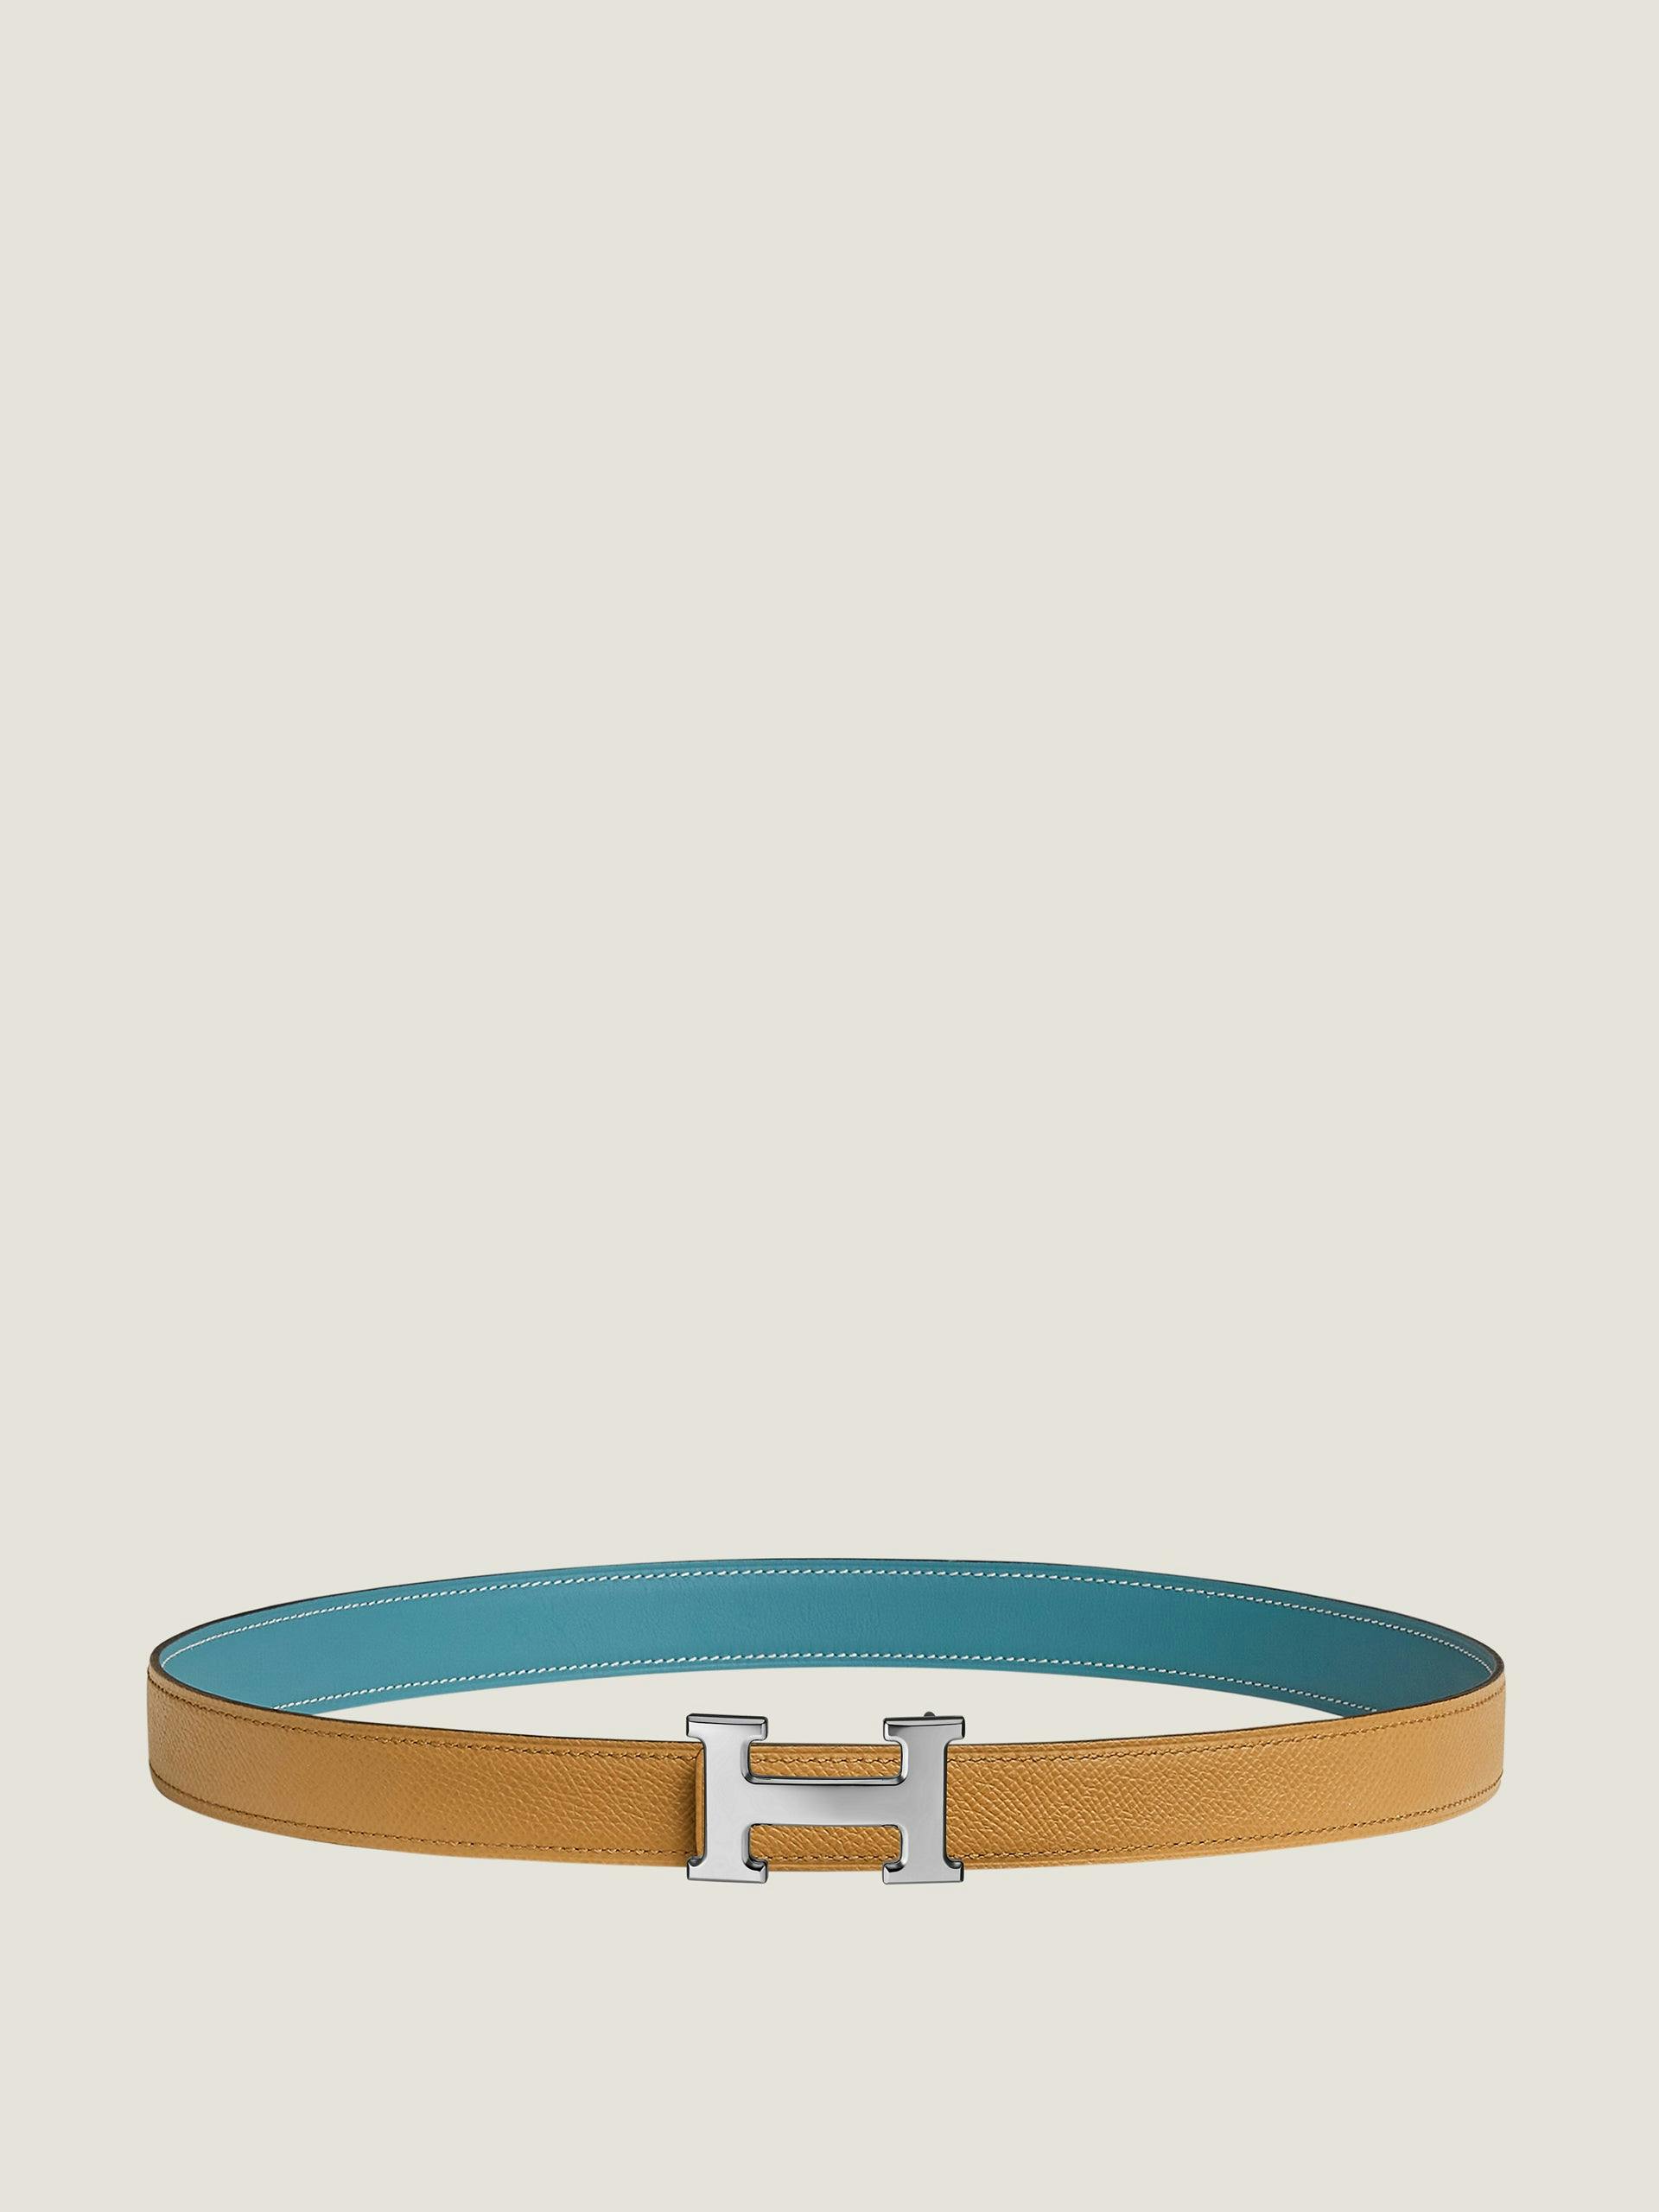 Tan and blue reversible leather belt